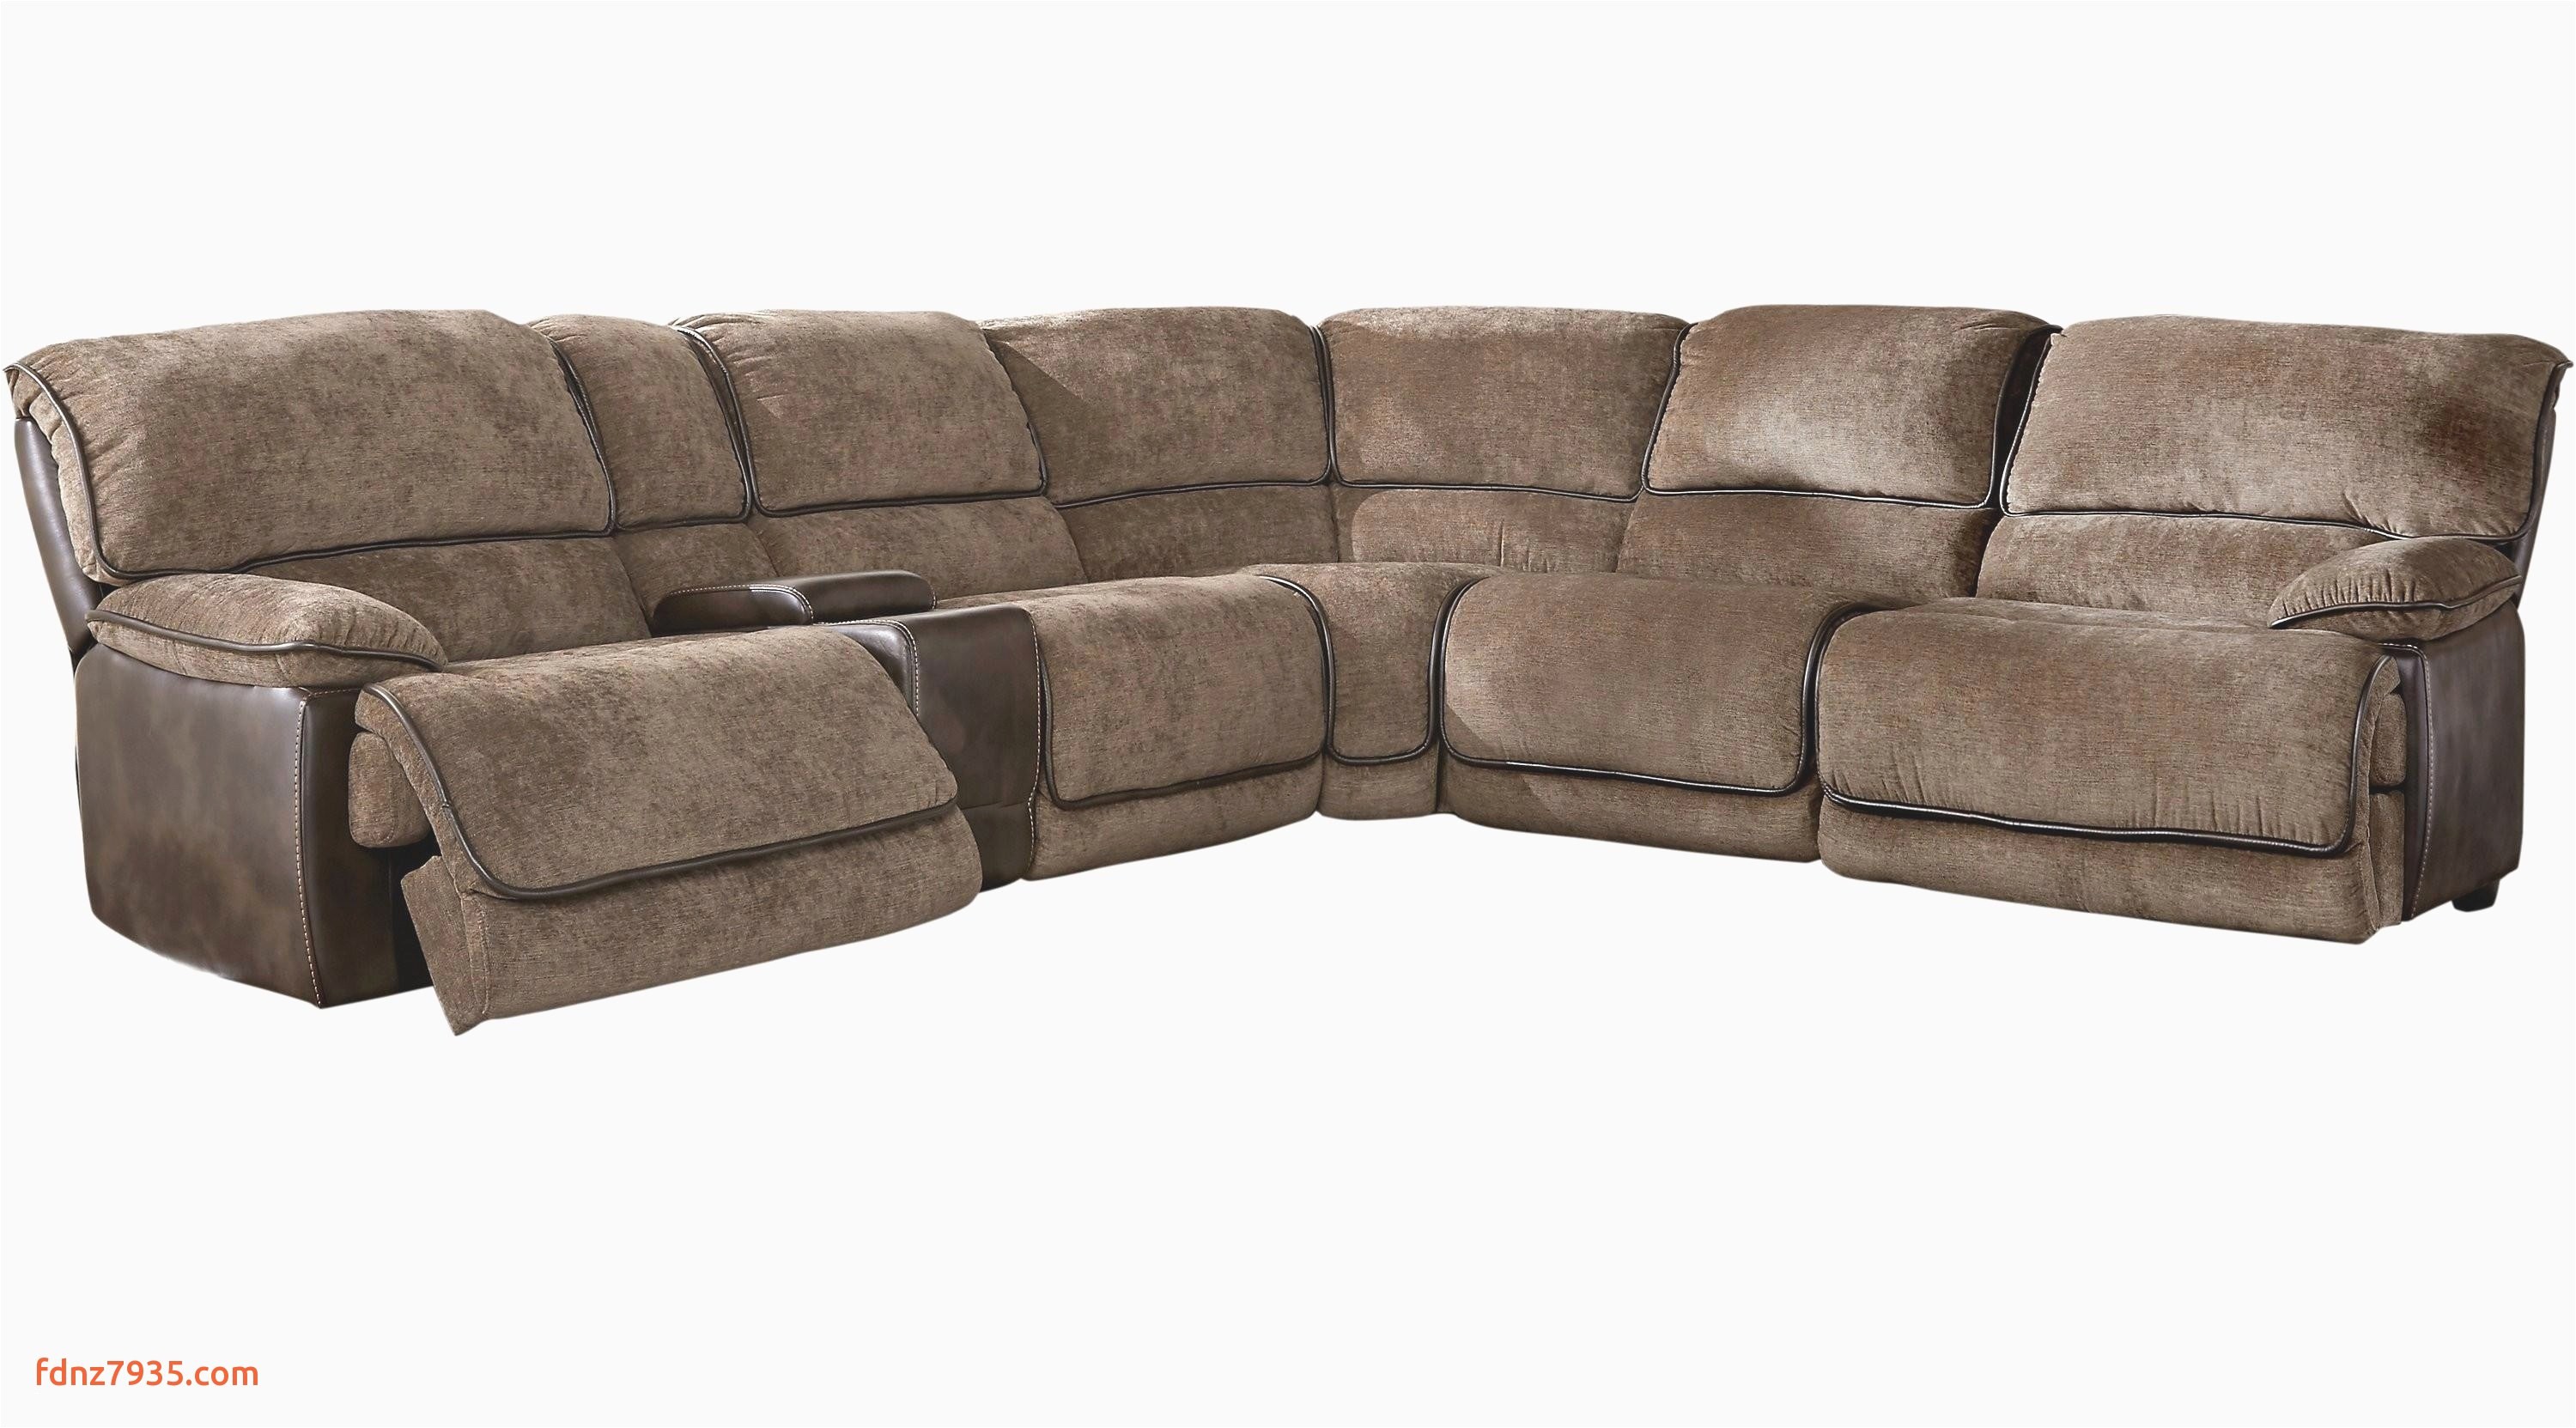 sofa sectionals fresh slipcover sectional sofa luxury couch cover new sectional couch 0d leather